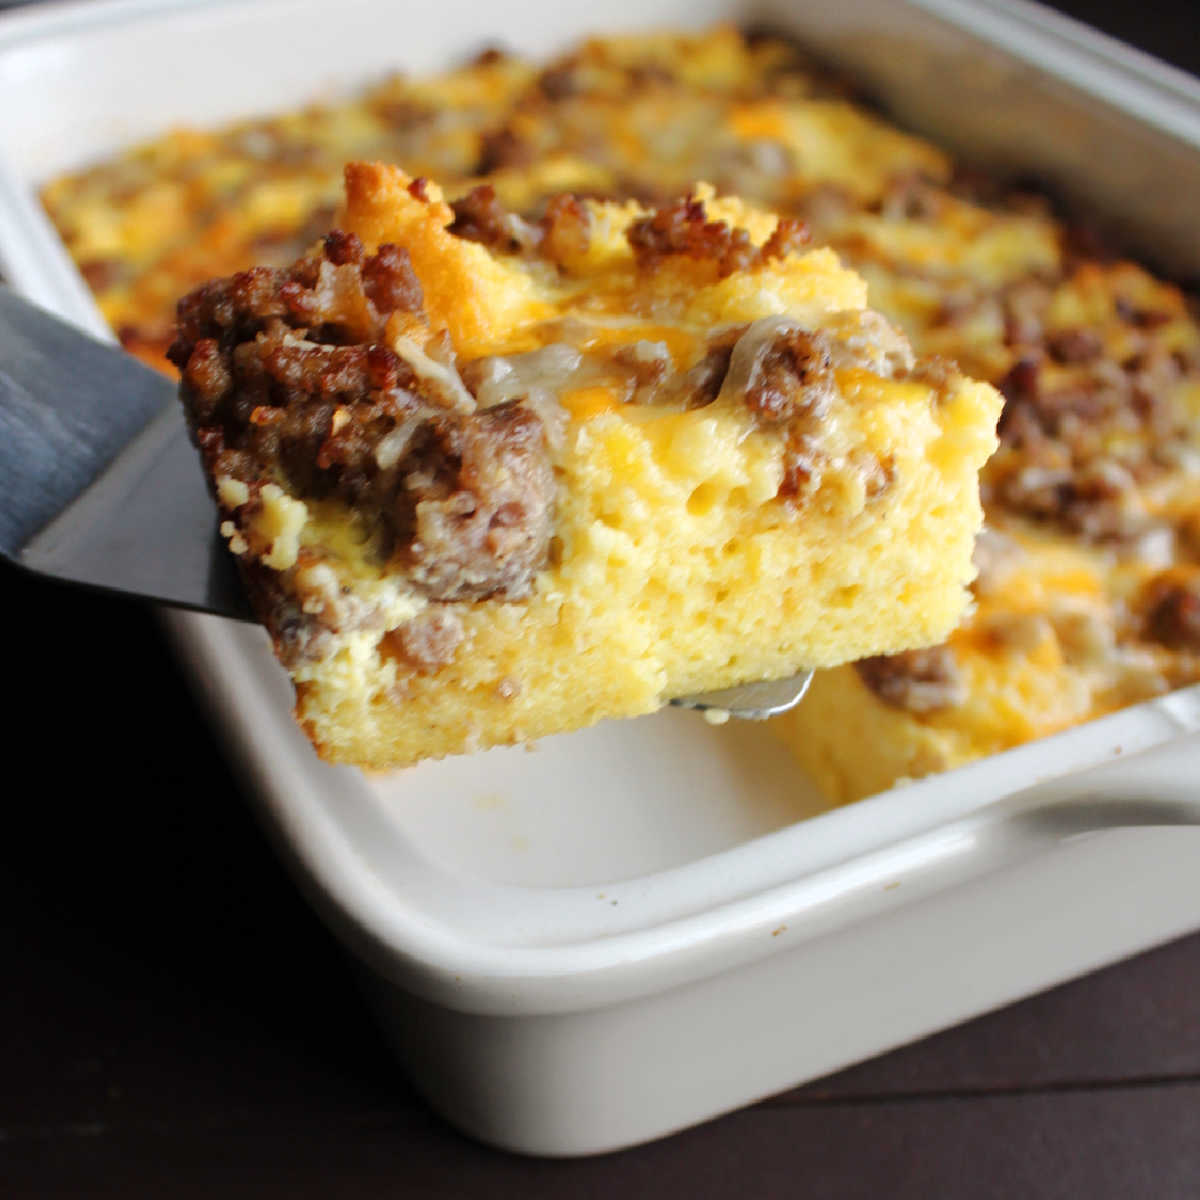 Spatula lifting out piece of egg casserole with cornbread, sausage and cheddar cheese.